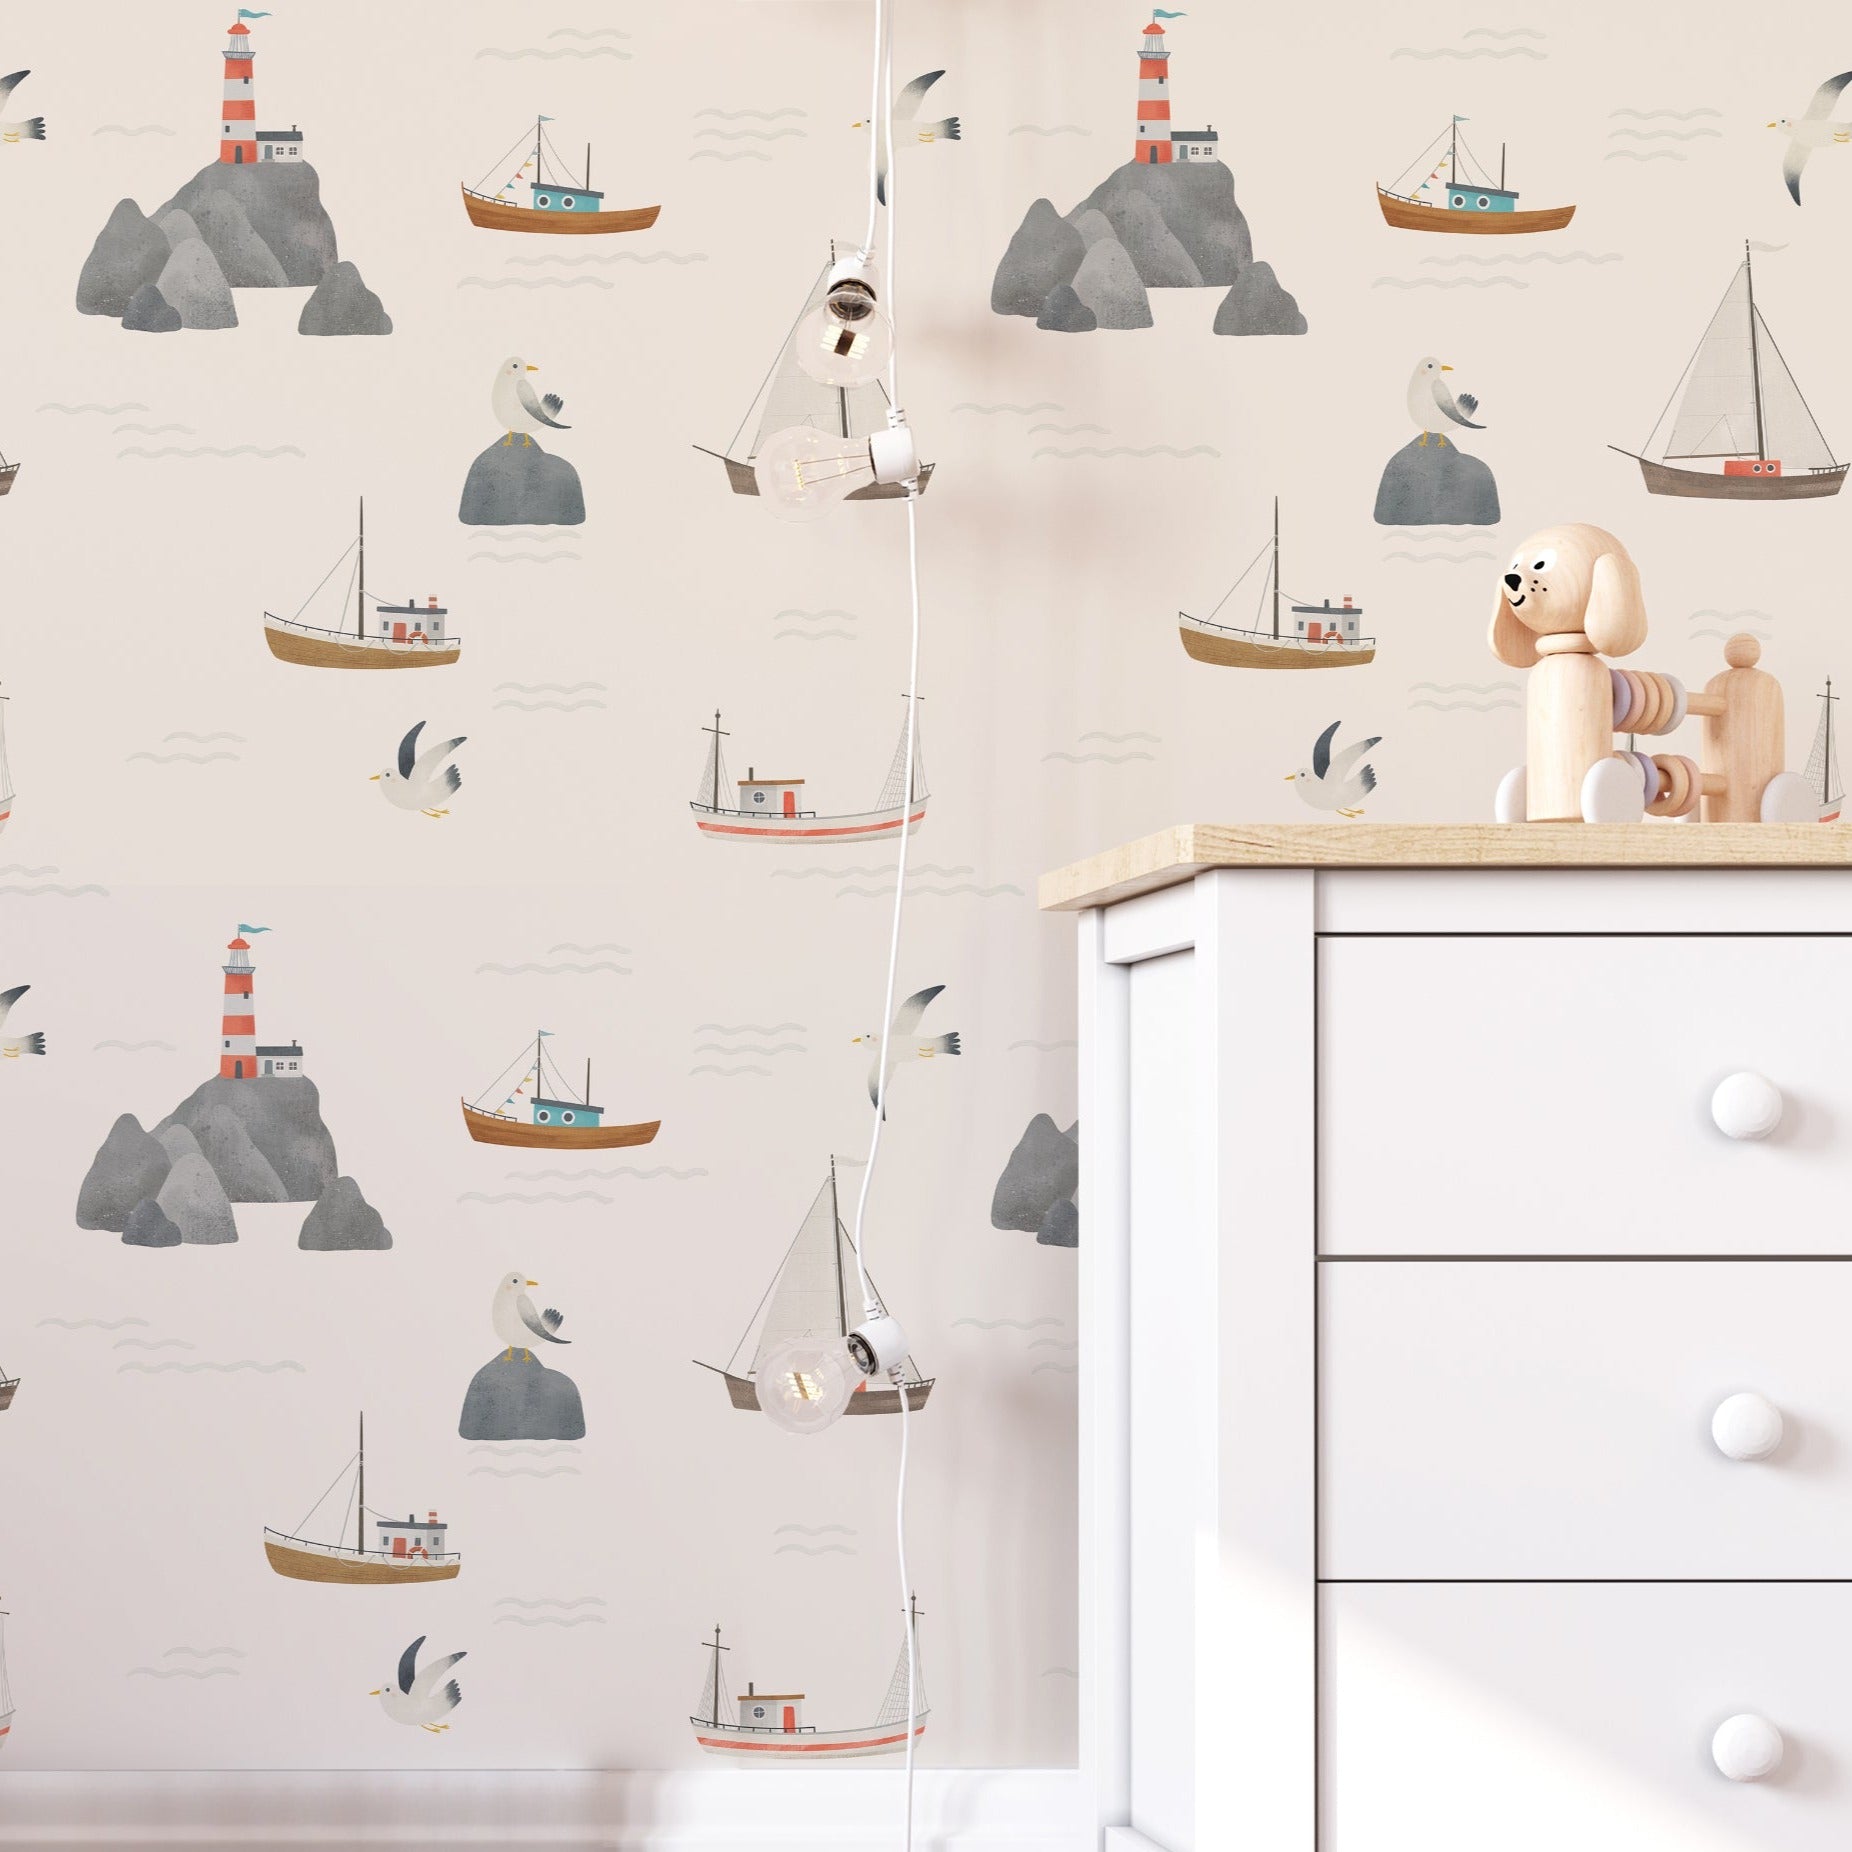 A child's room adorned with "By the Sea - Sailboat and Lighthouse Wallpaper," featuring whimsical nautical scenes that include sailboats, lighthouses, and floating sea birds. This wallpaper brings a sense of adventure and calm to the space, perfectly suiting a playful yet restful child's bedroom.